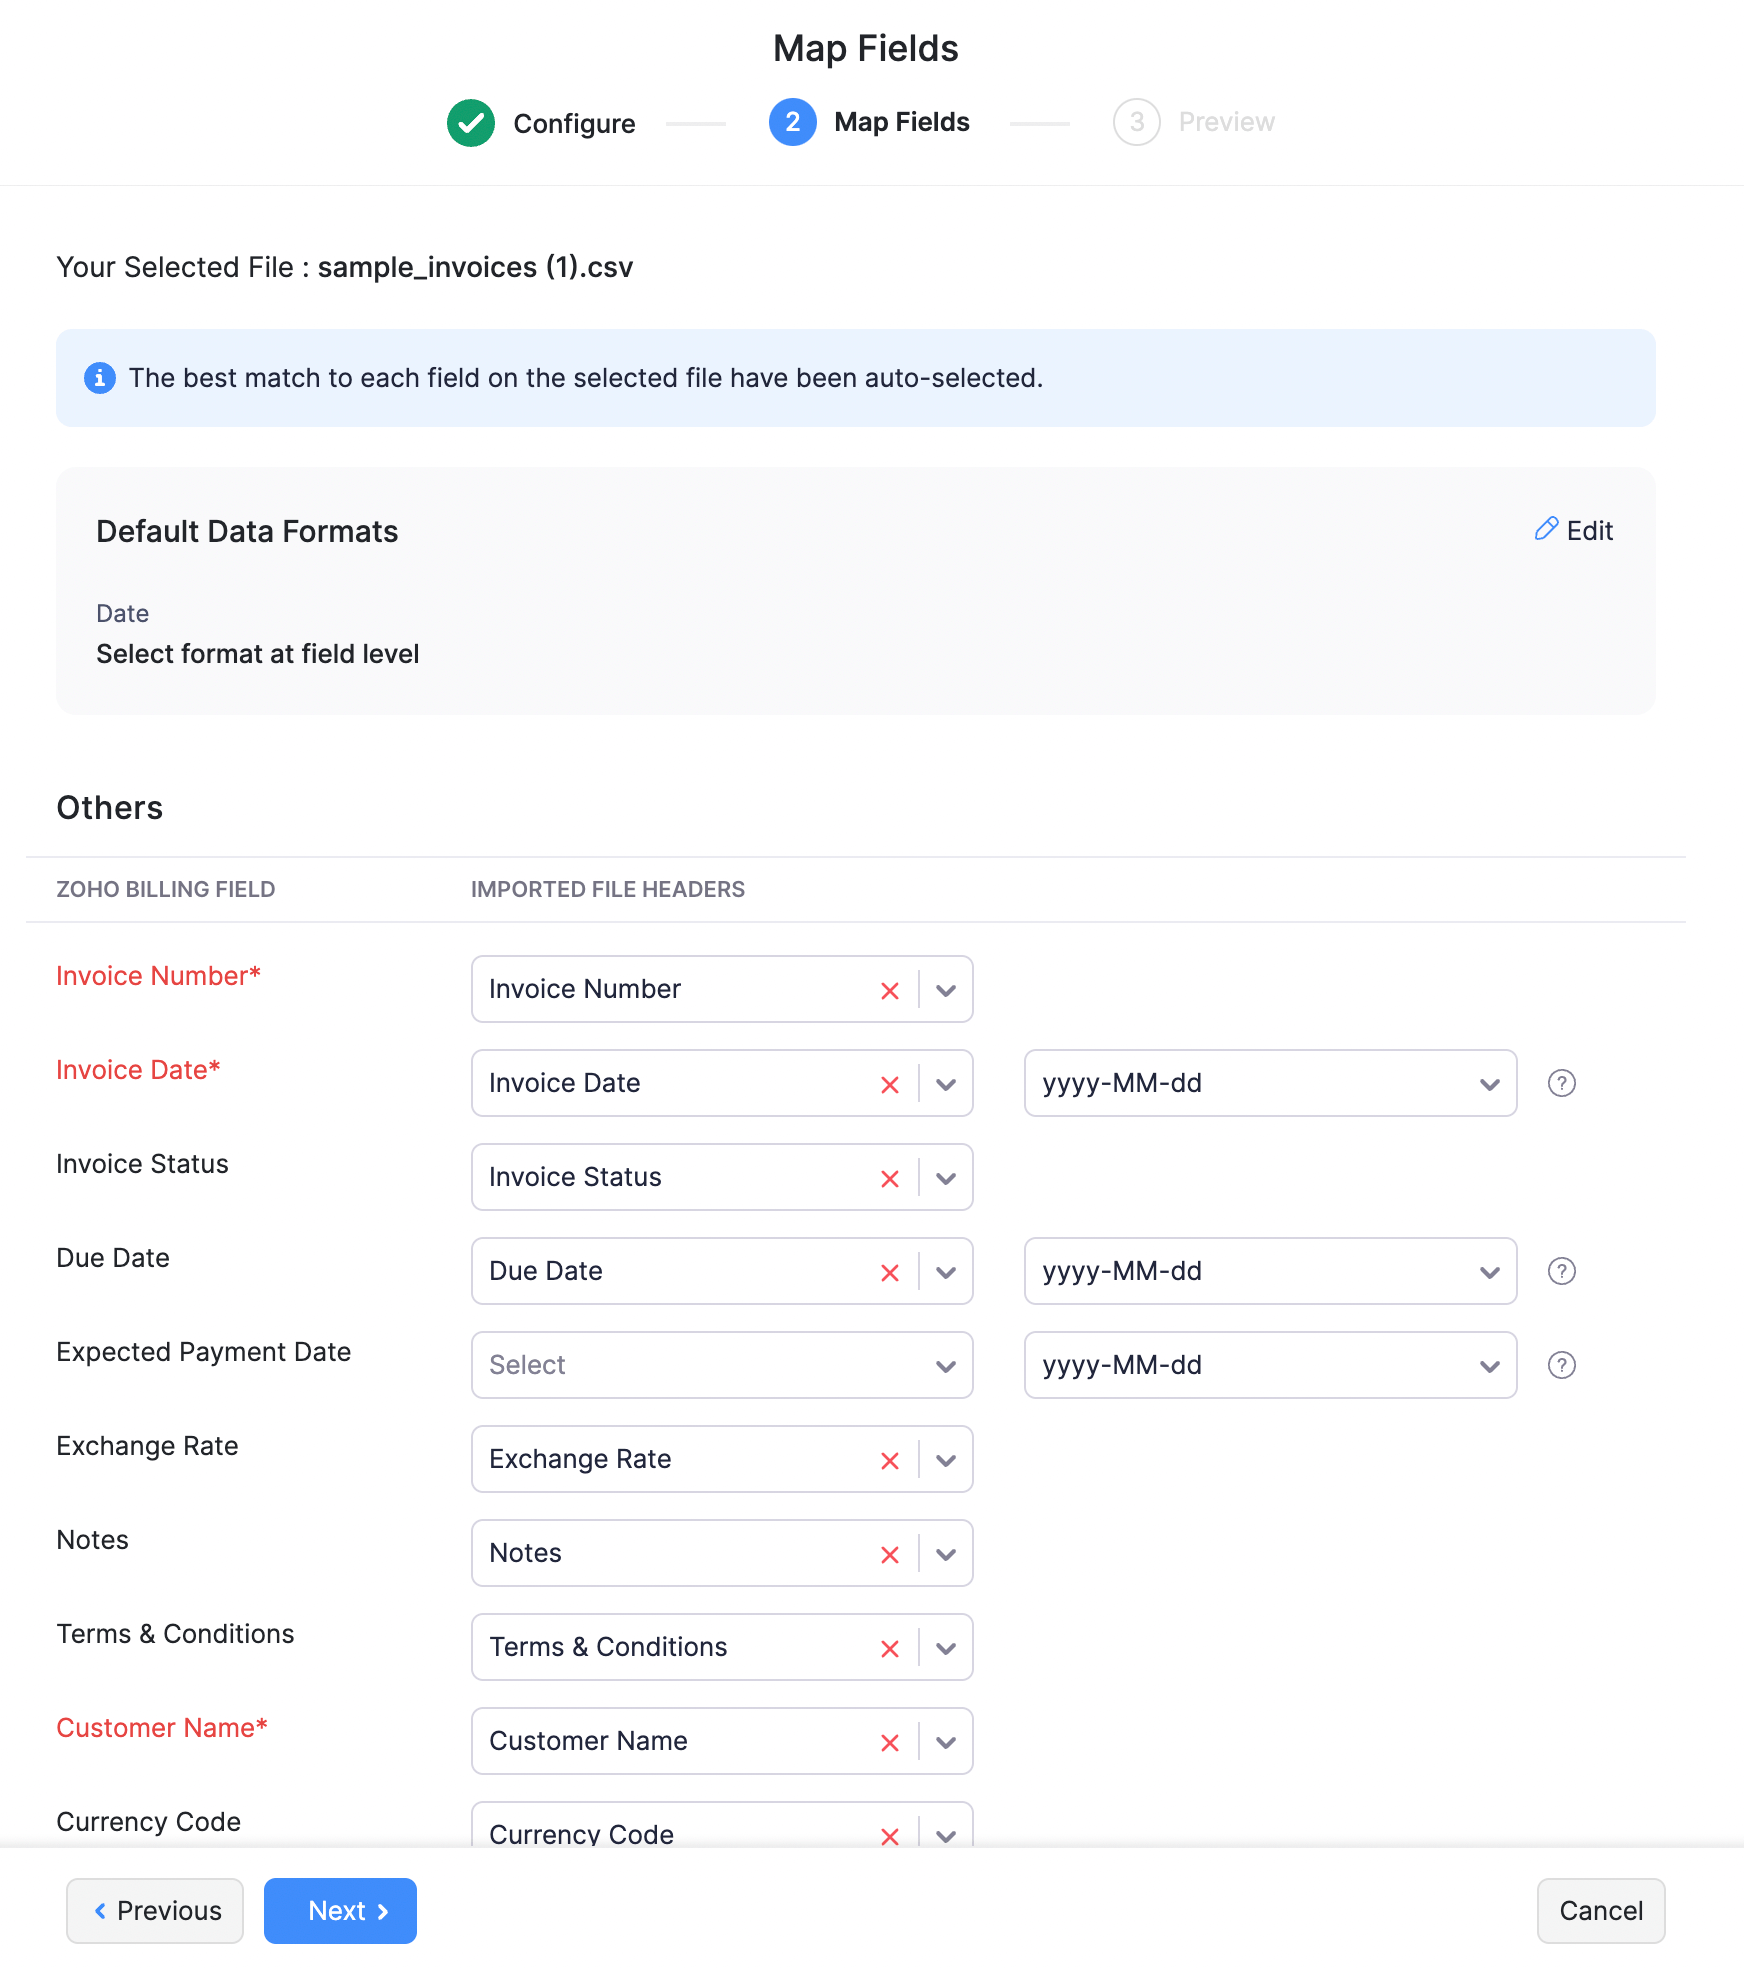 Invoices - Match Import File Fields